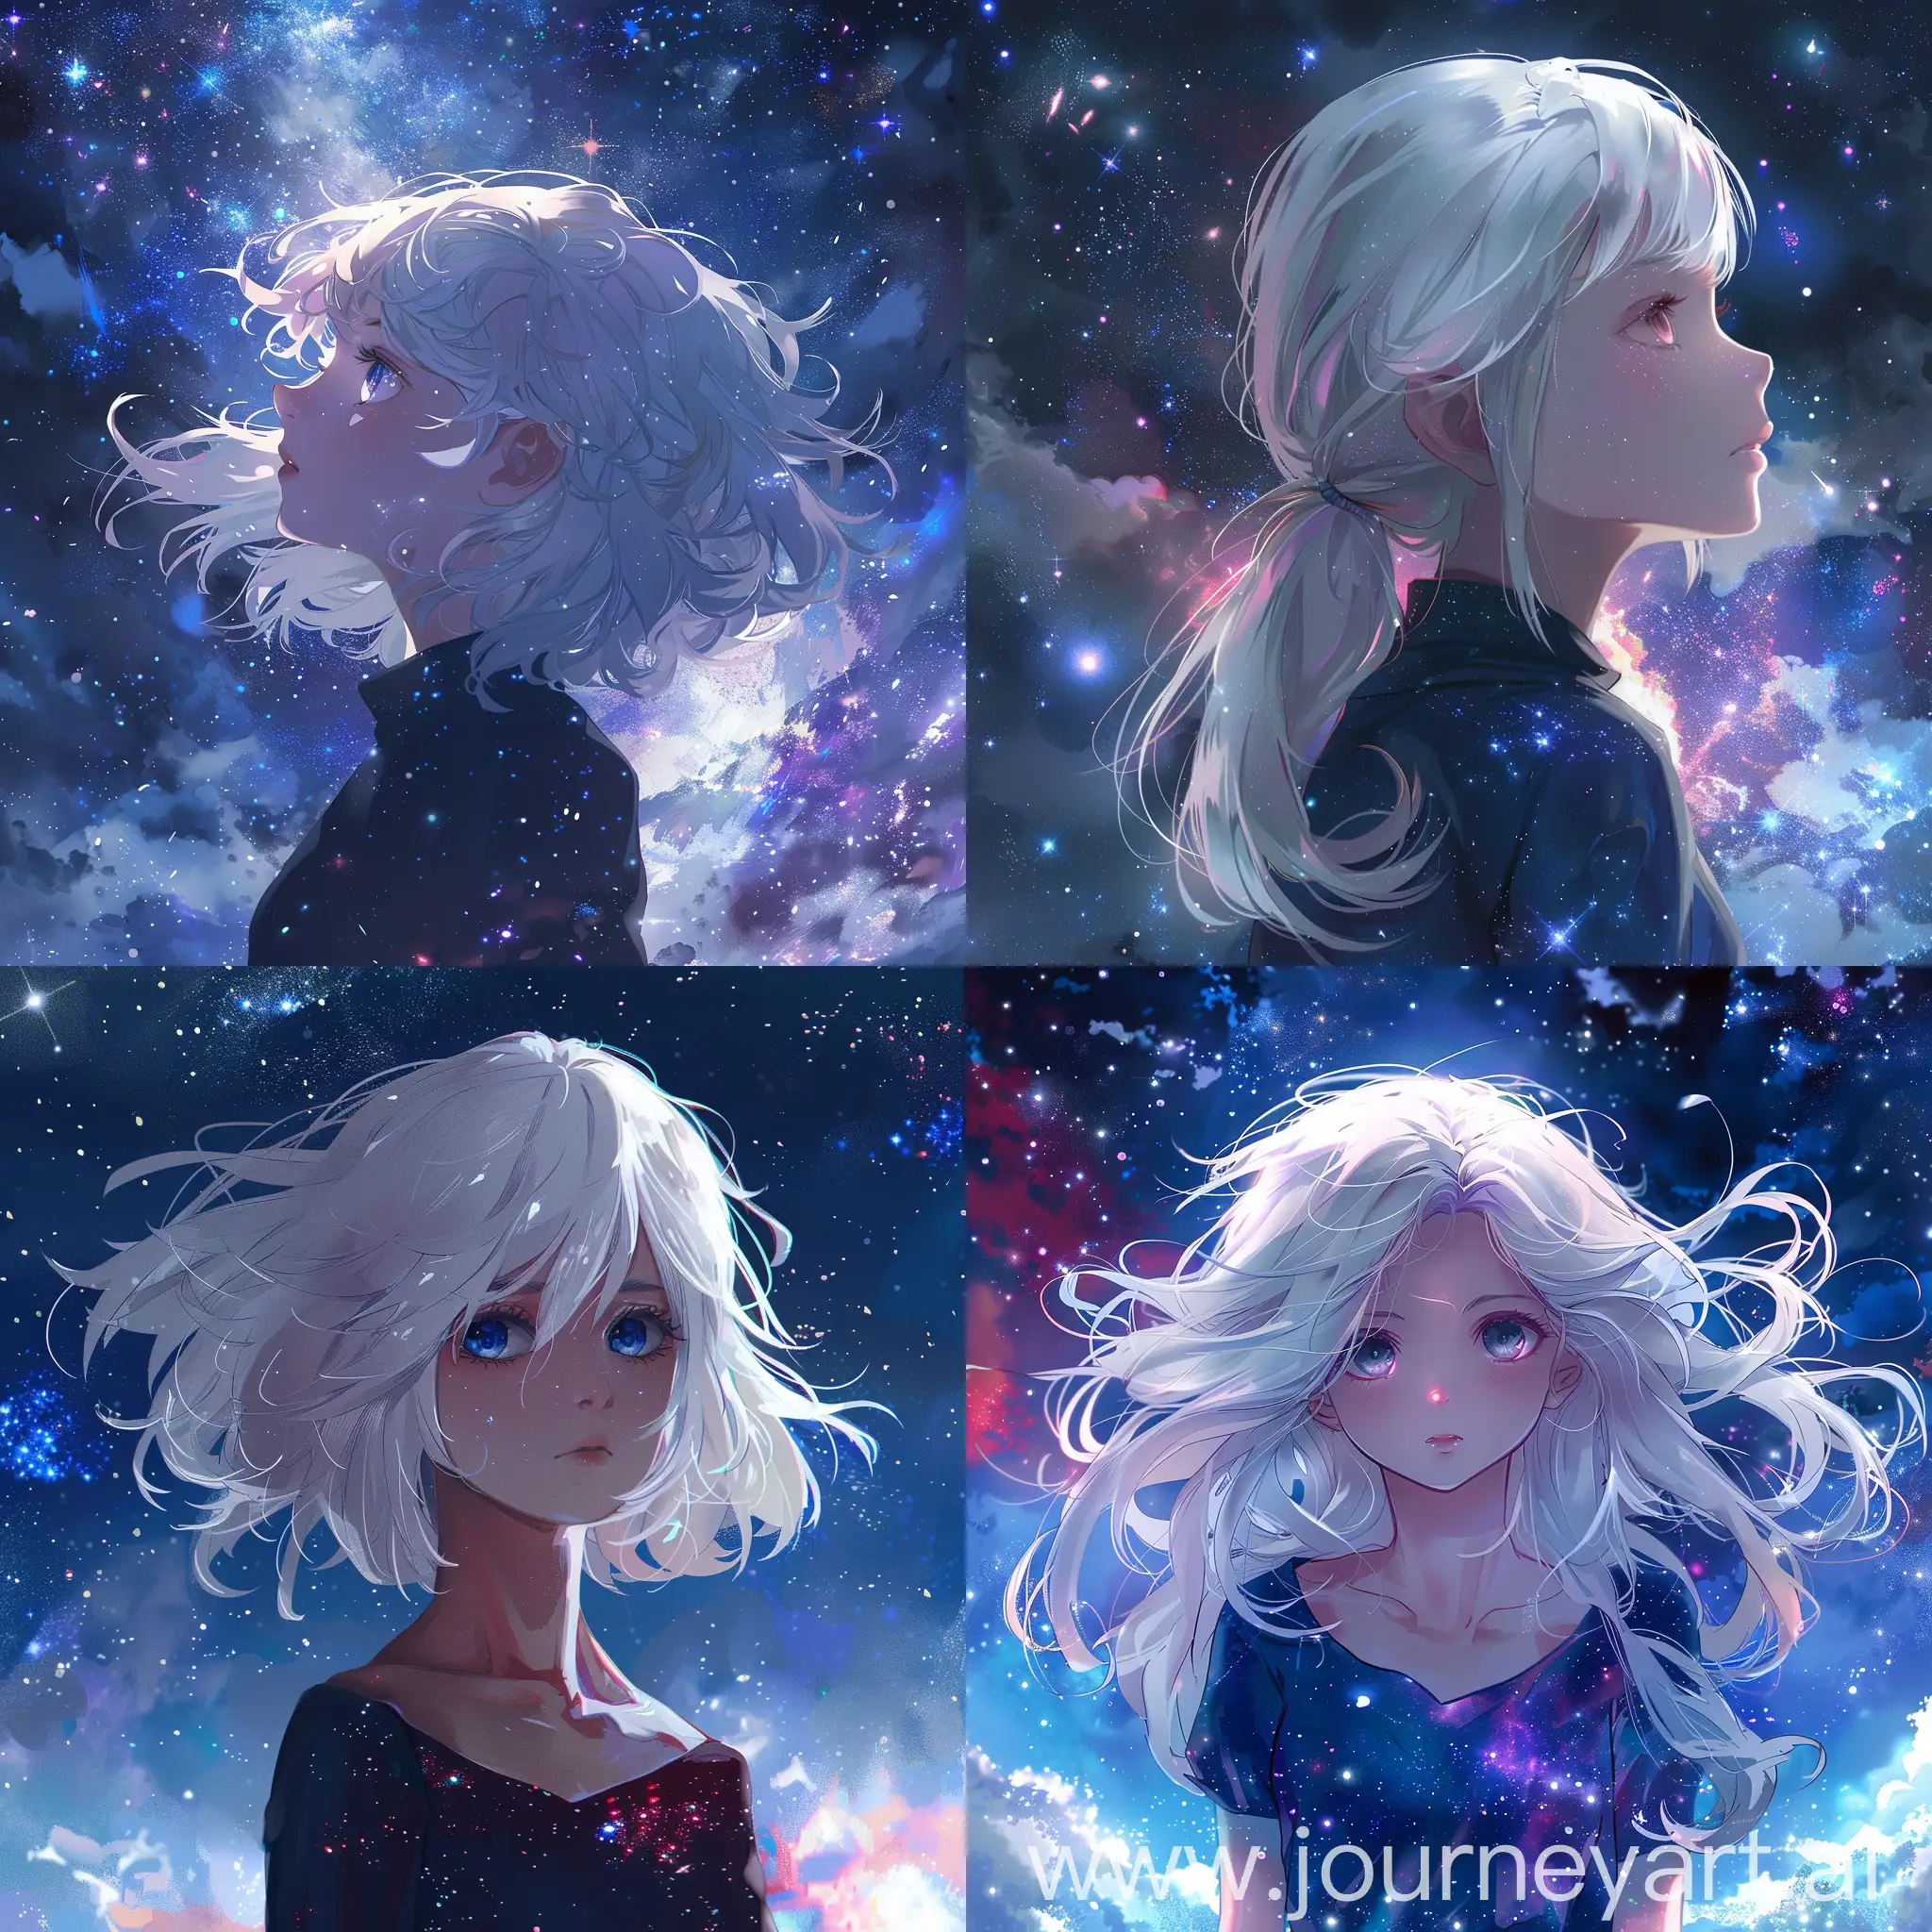 Mesmerizing-WhiteHaired-Anime-Girl-in-Galaxy-Ultra-Quality-8K-Art